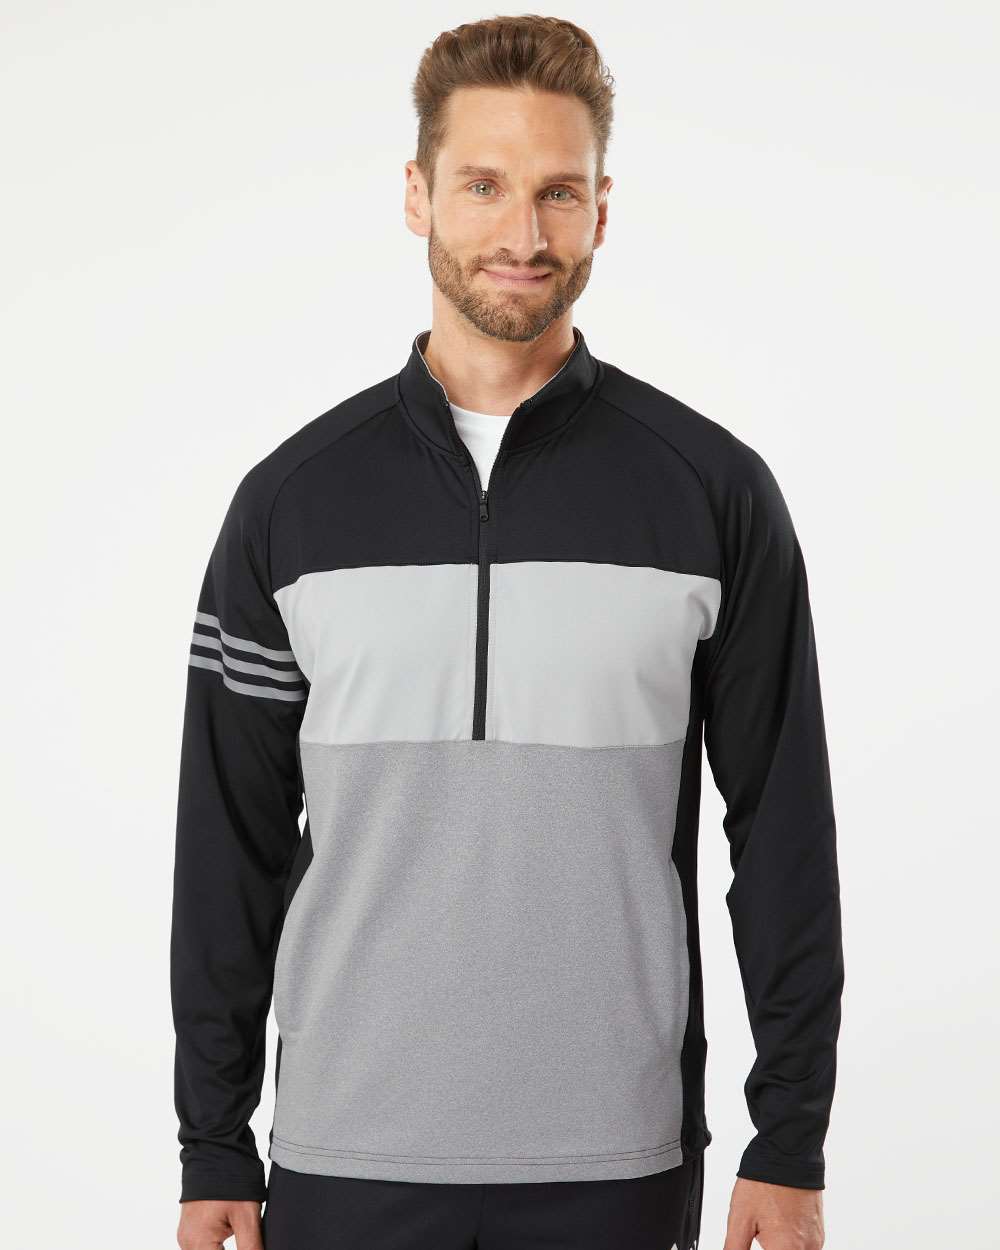 Adidas - 3-Stripes Competition Quarter-Zip Pullover - A492